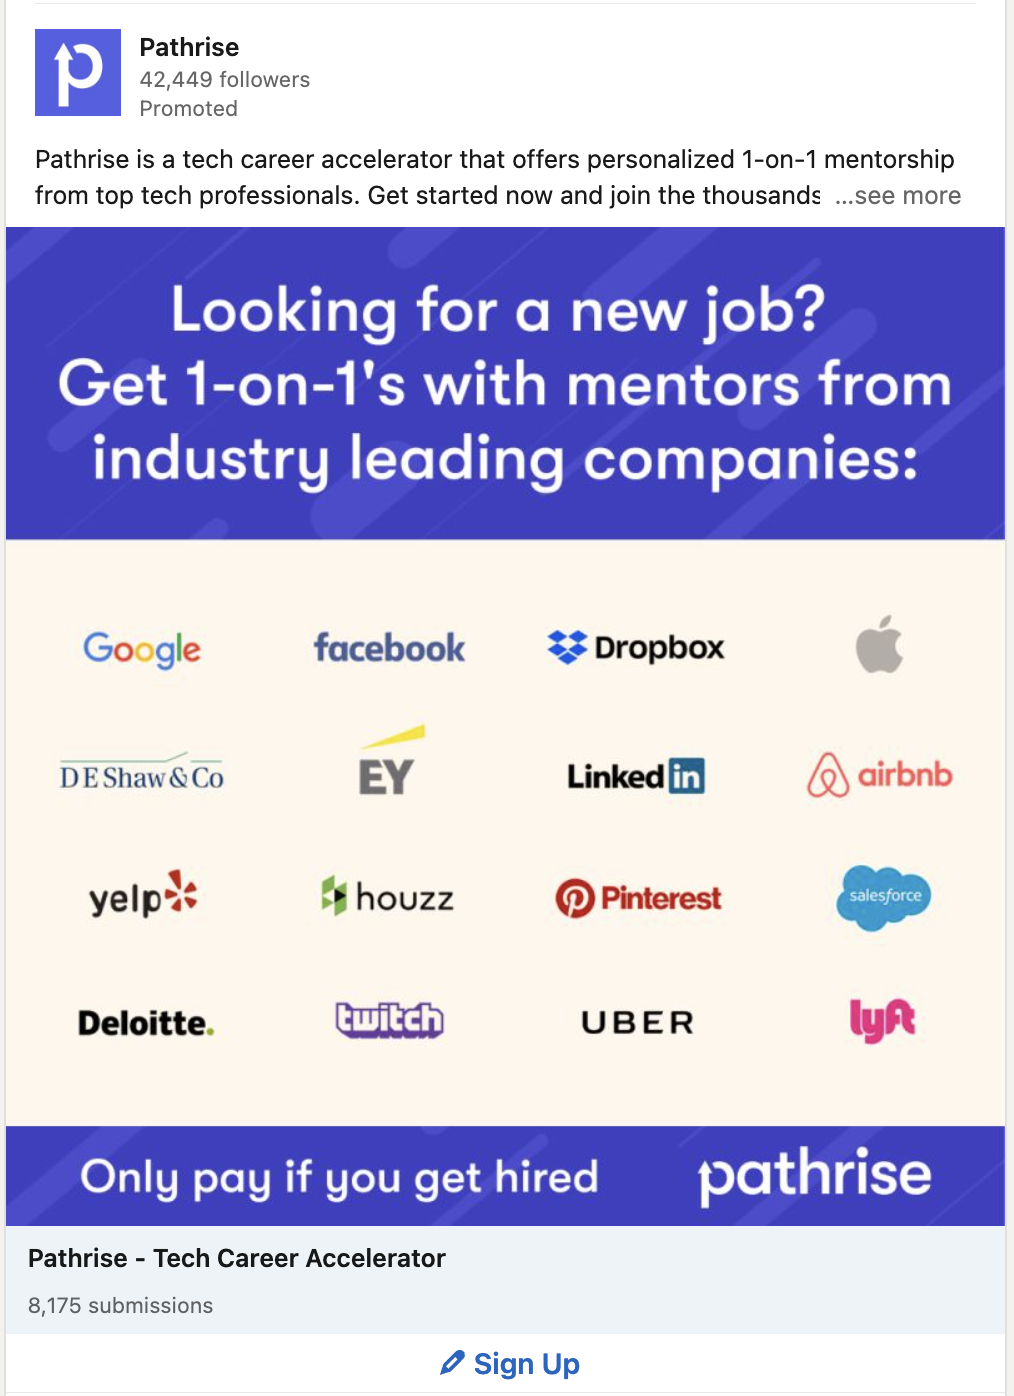 A LinkedIn Lead Gen ad from Pathrise